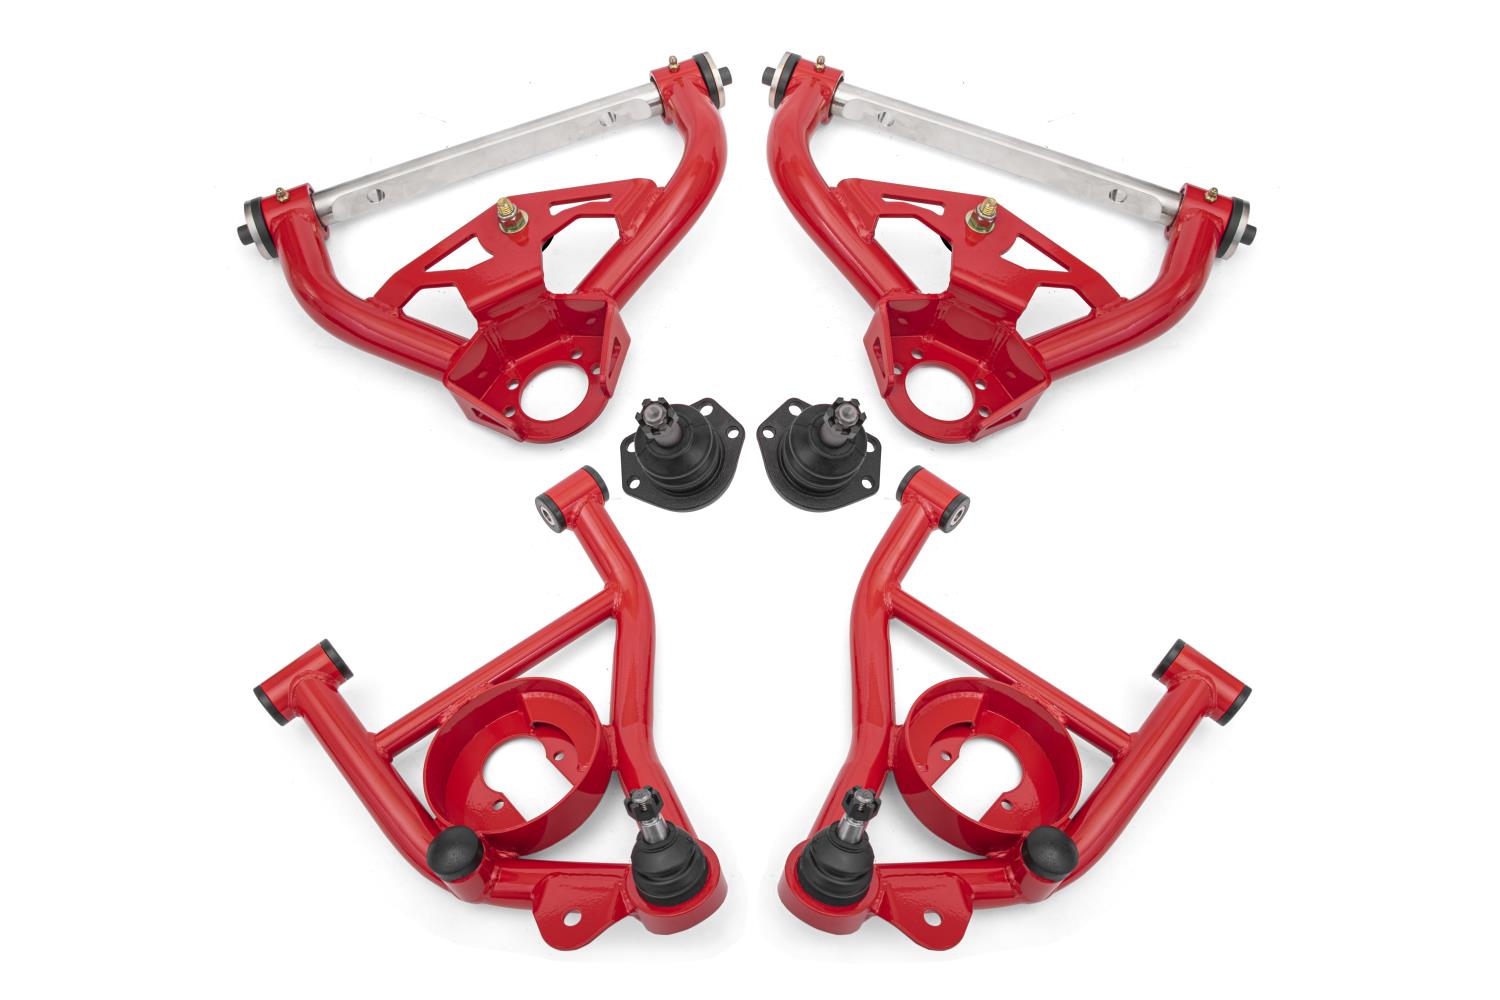 AAK461R Front Control Arm Kit w/Delrin Bushings & Std. Ball Joints for Select 1978-1987 GM Cars (Red)